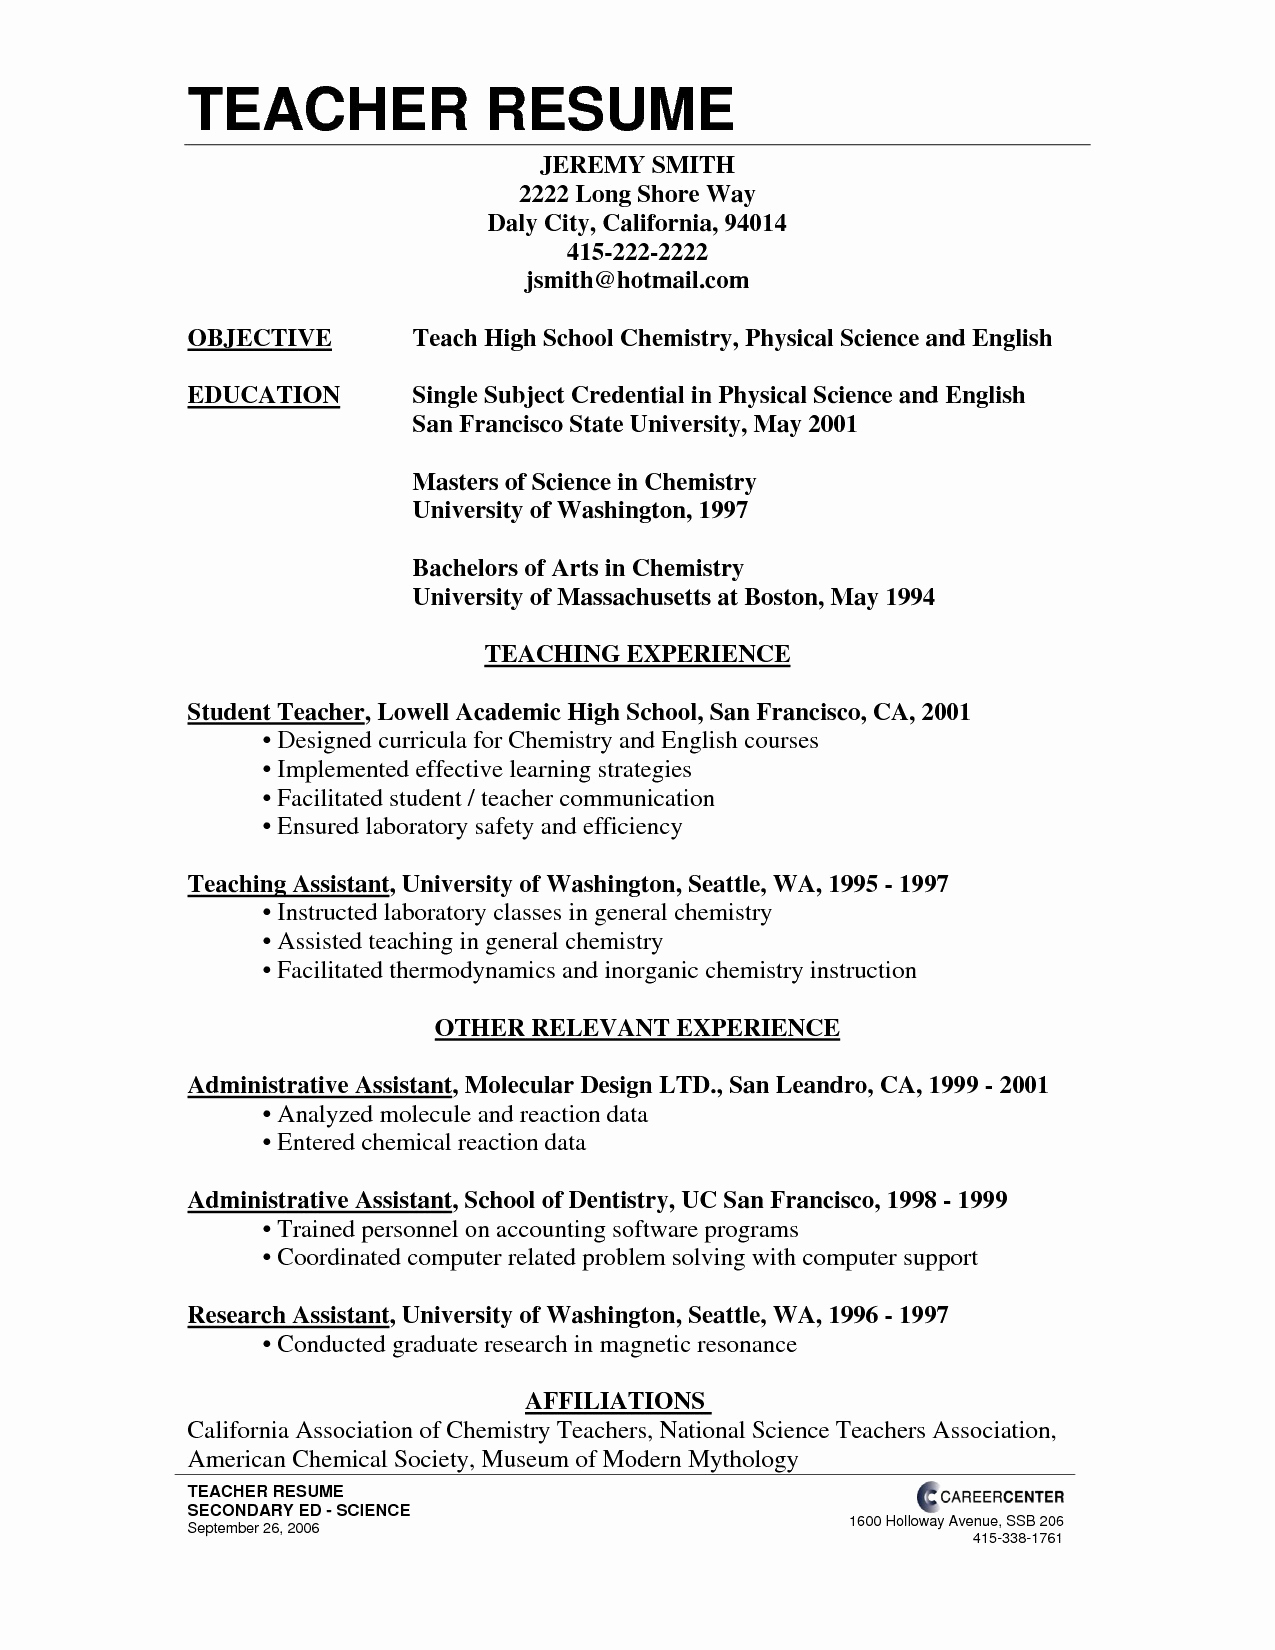 Professional Resume and Cover Letter Template - Resume Cover Letter Example New Free Cover Letter Templates Examples